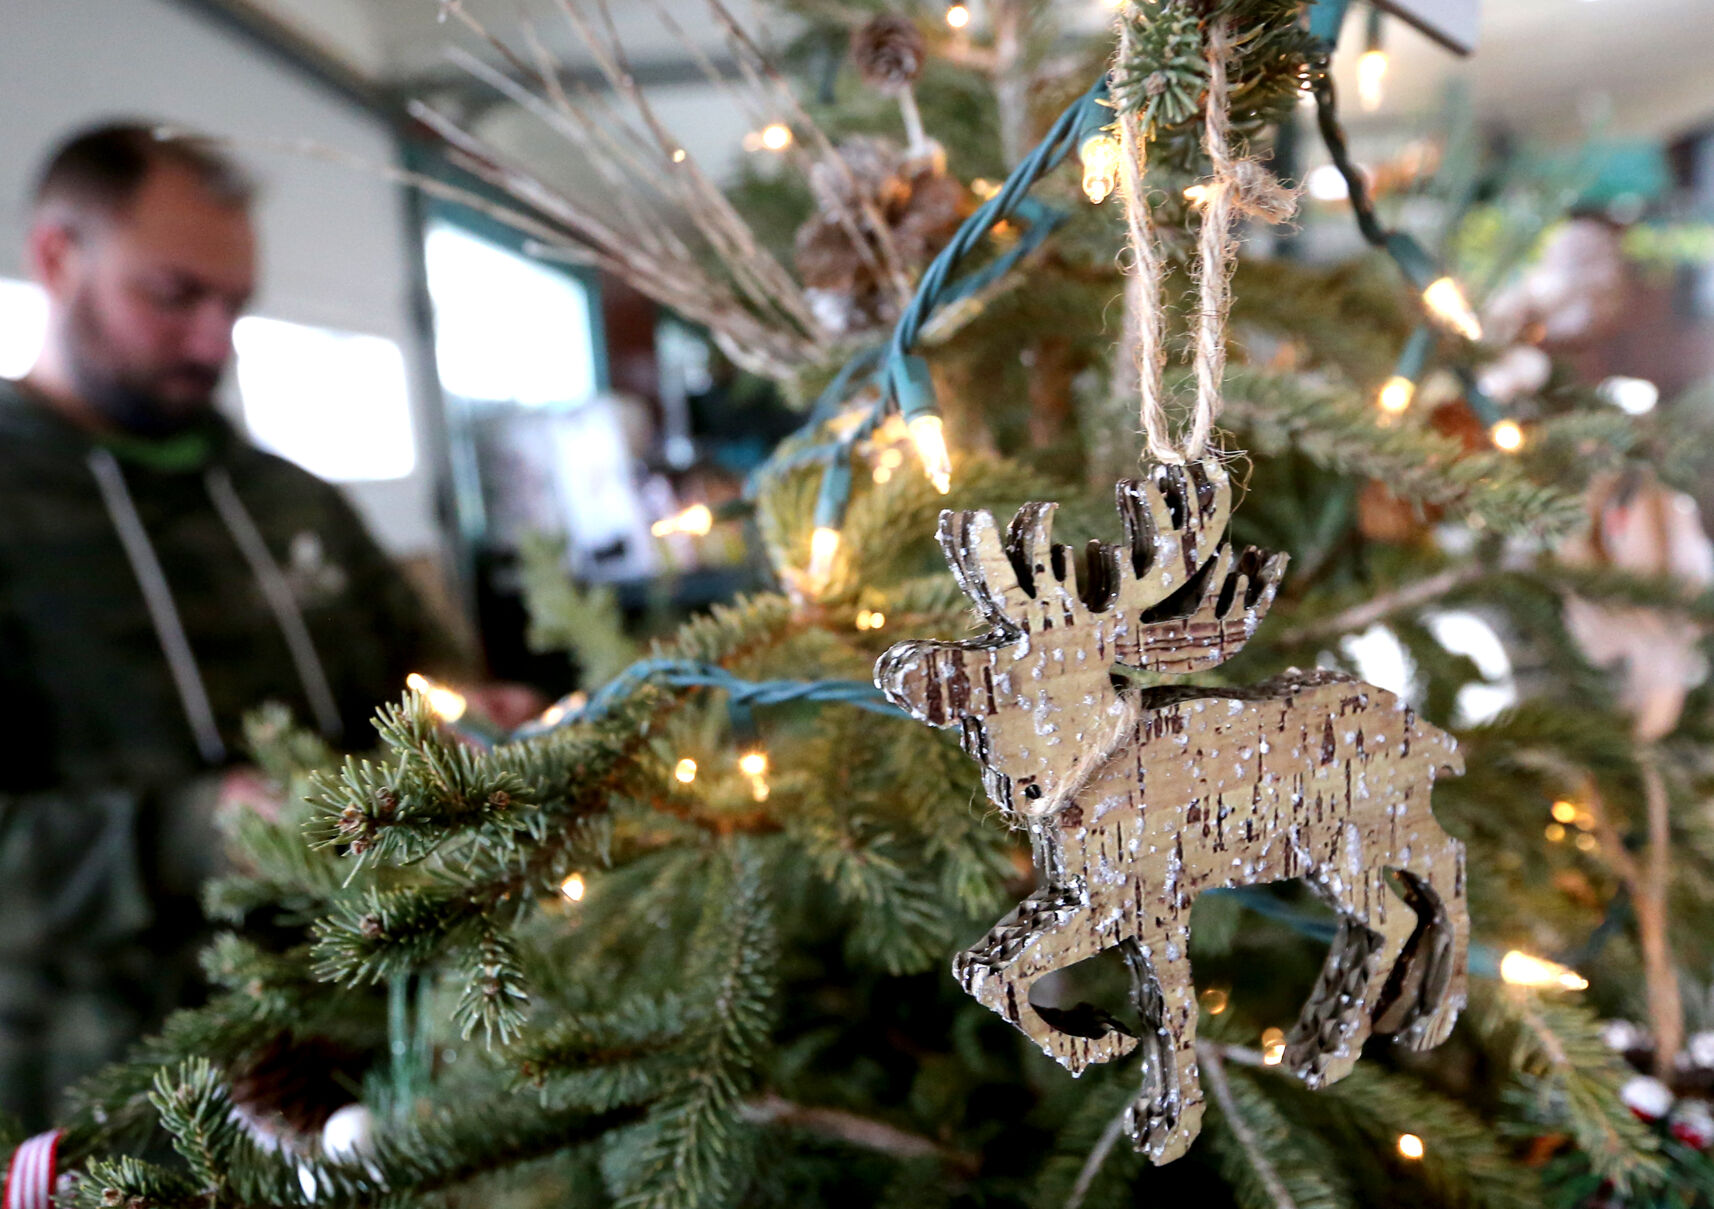 An ornament hangs from one of the trees displayed at the nursery.    PHOTO CREDIT: JESSICA REILLY, Telegraph Herald